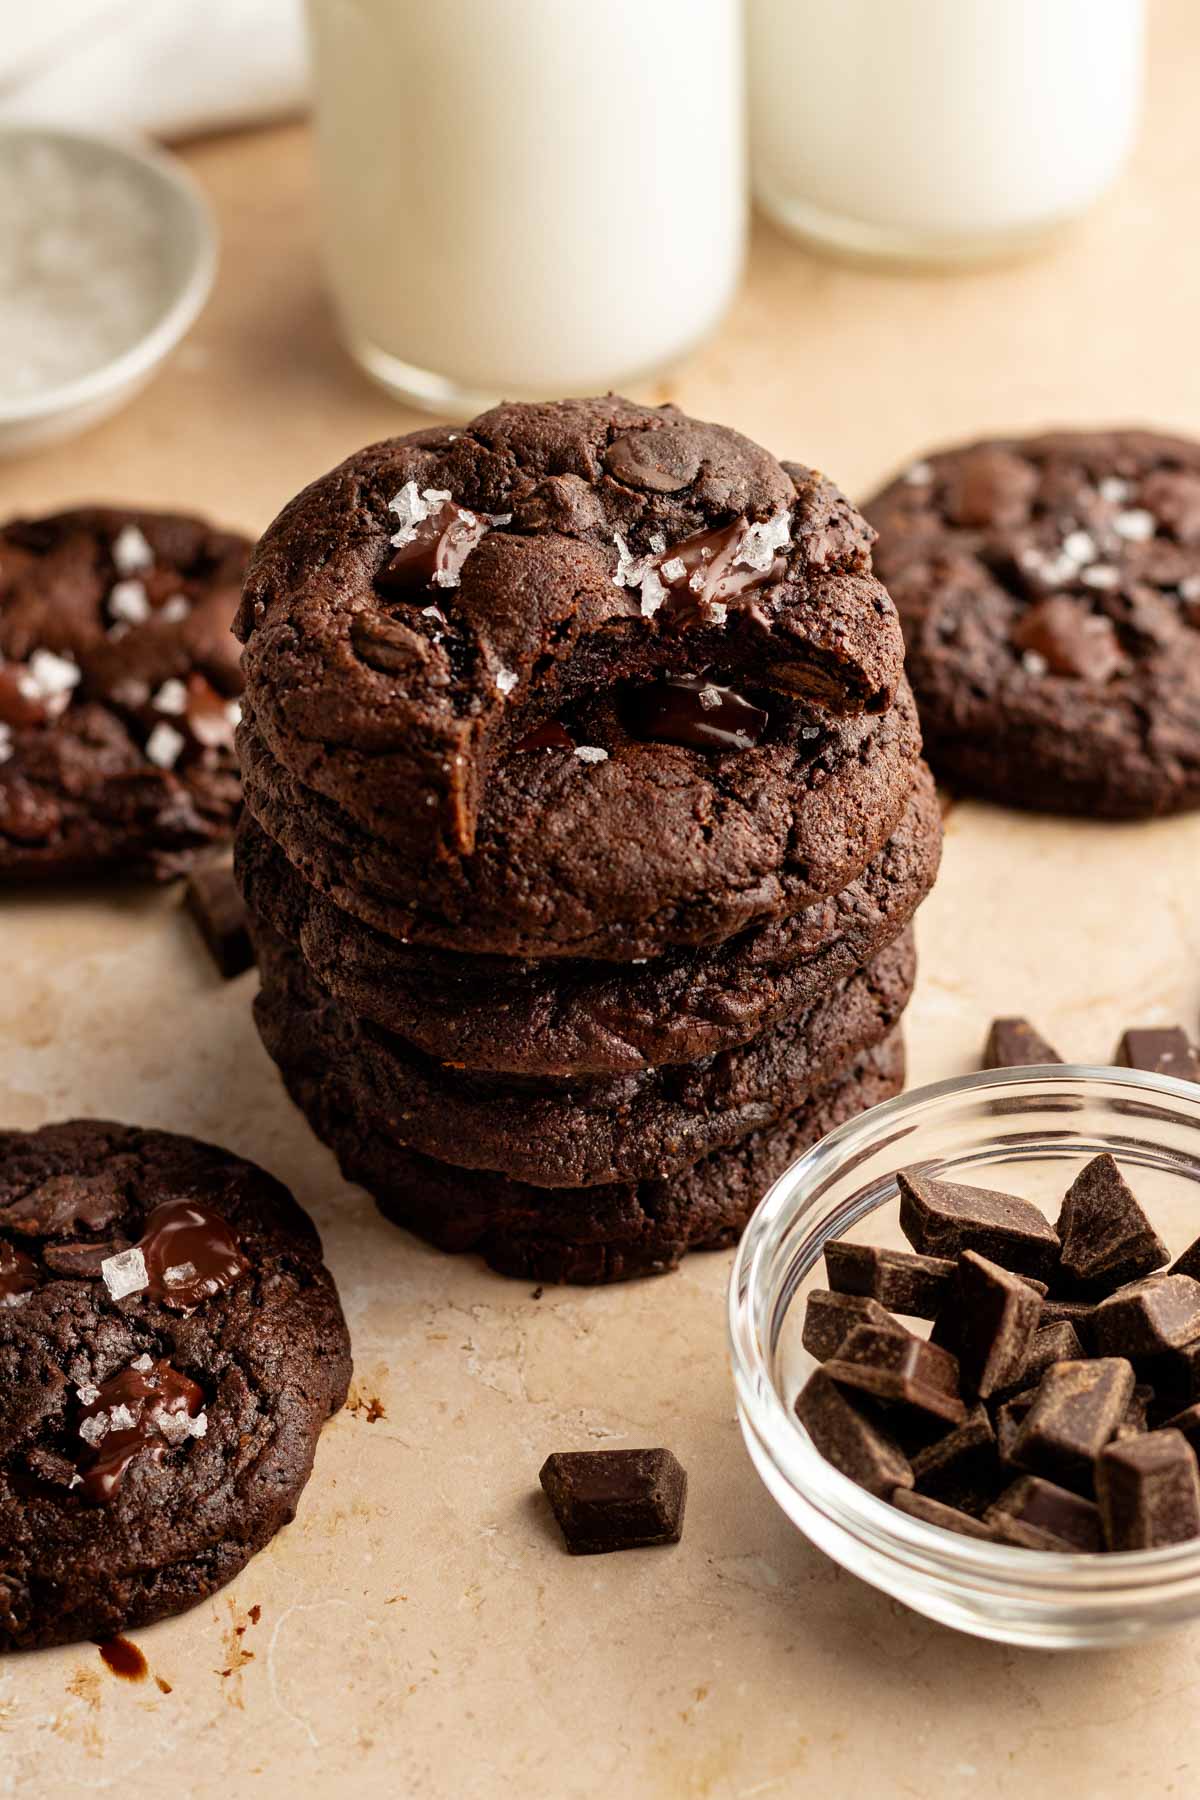 Stack of chocolate cookies with the top one missing a bite.